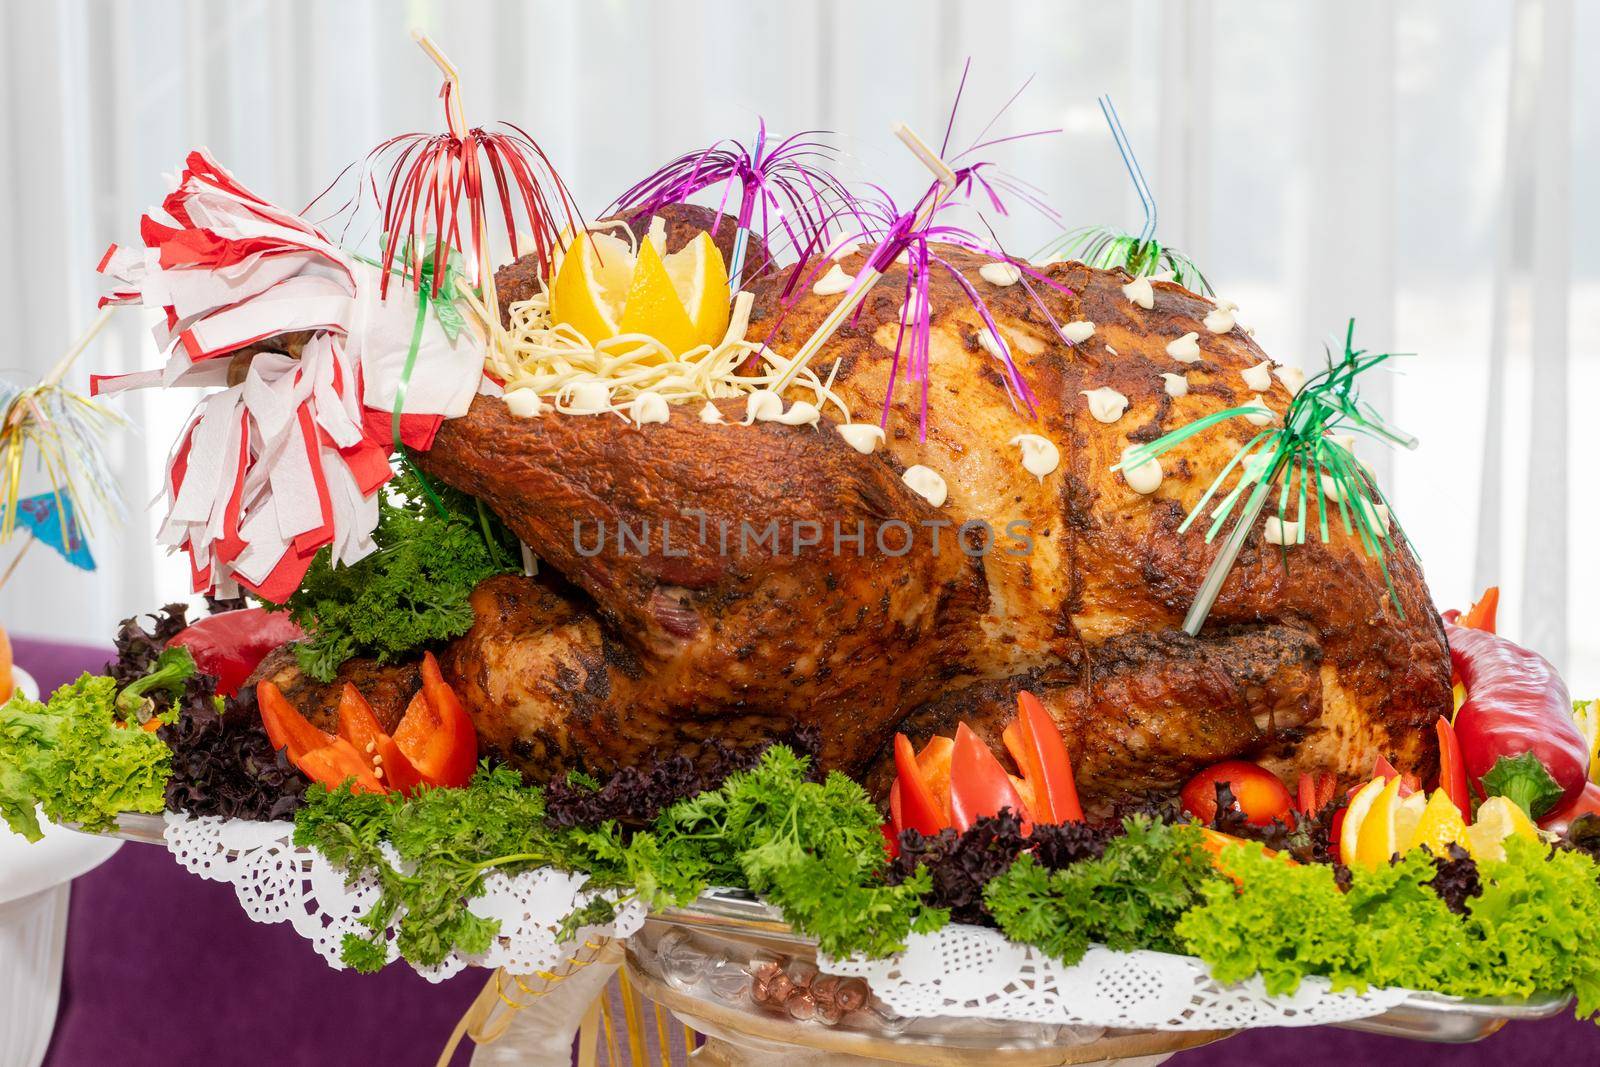 A large roast turkey on the holiday table at Thanksgiving